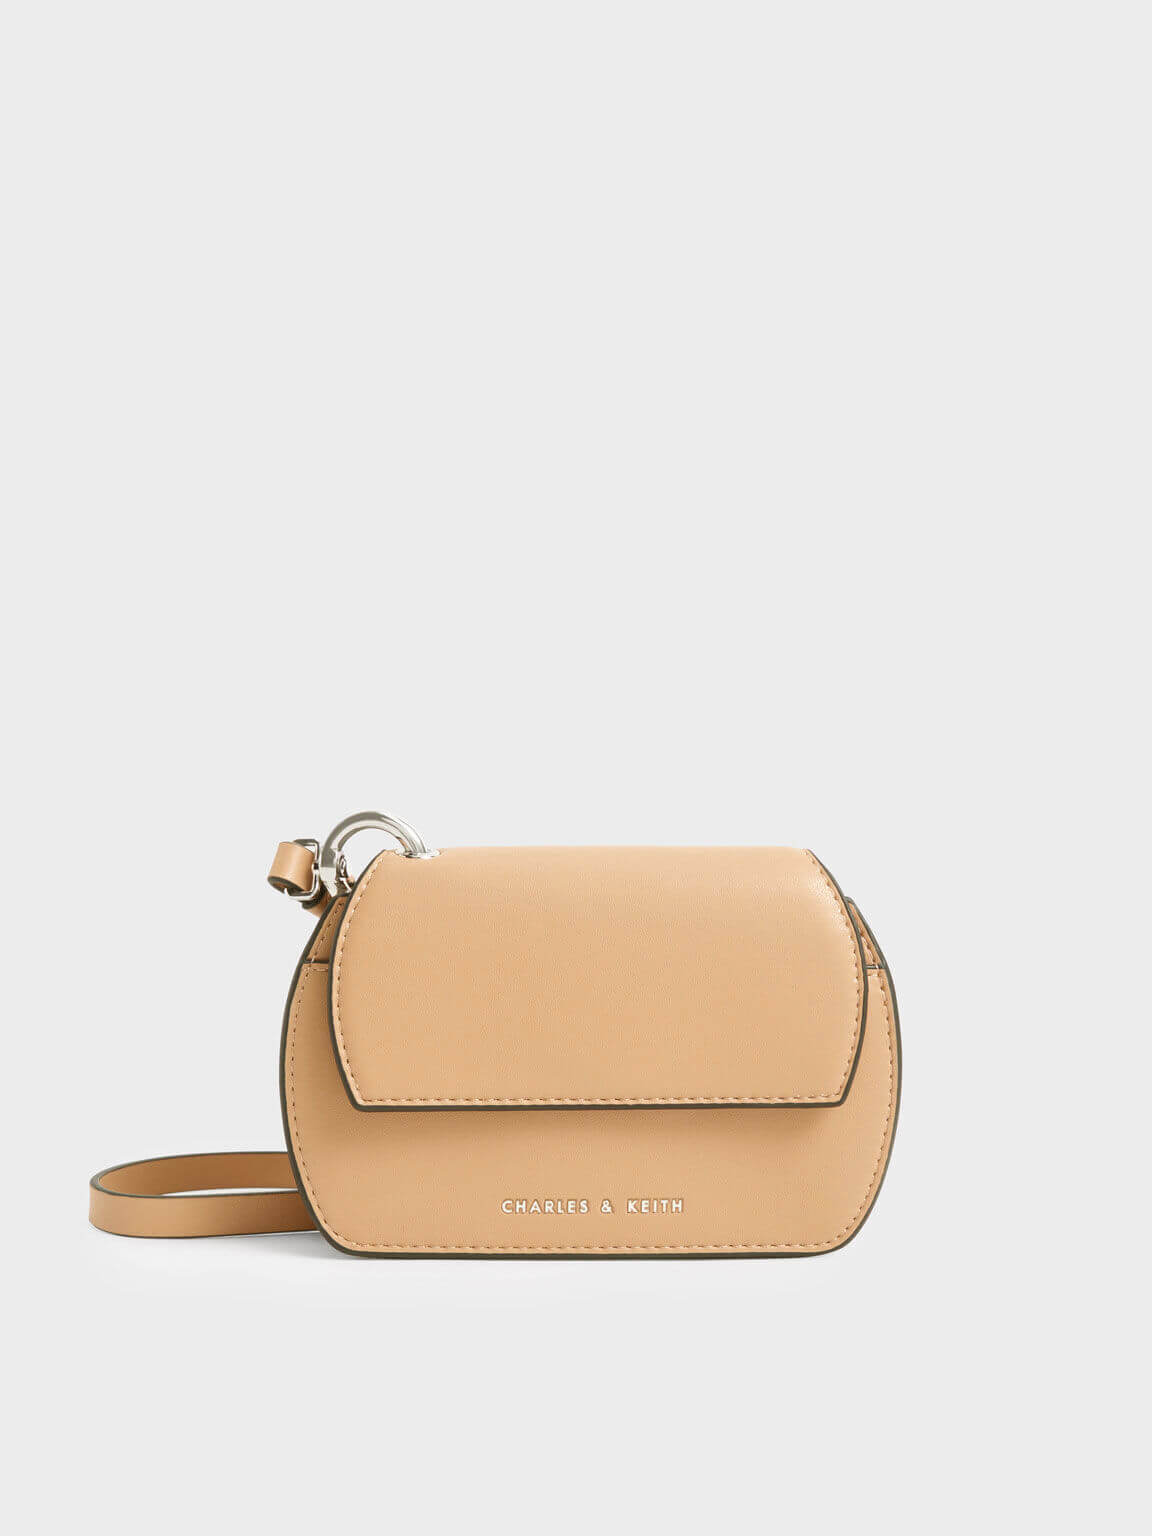 The Koa: All About The Iconic Shoulder Bag - CHARLES & KEITH International